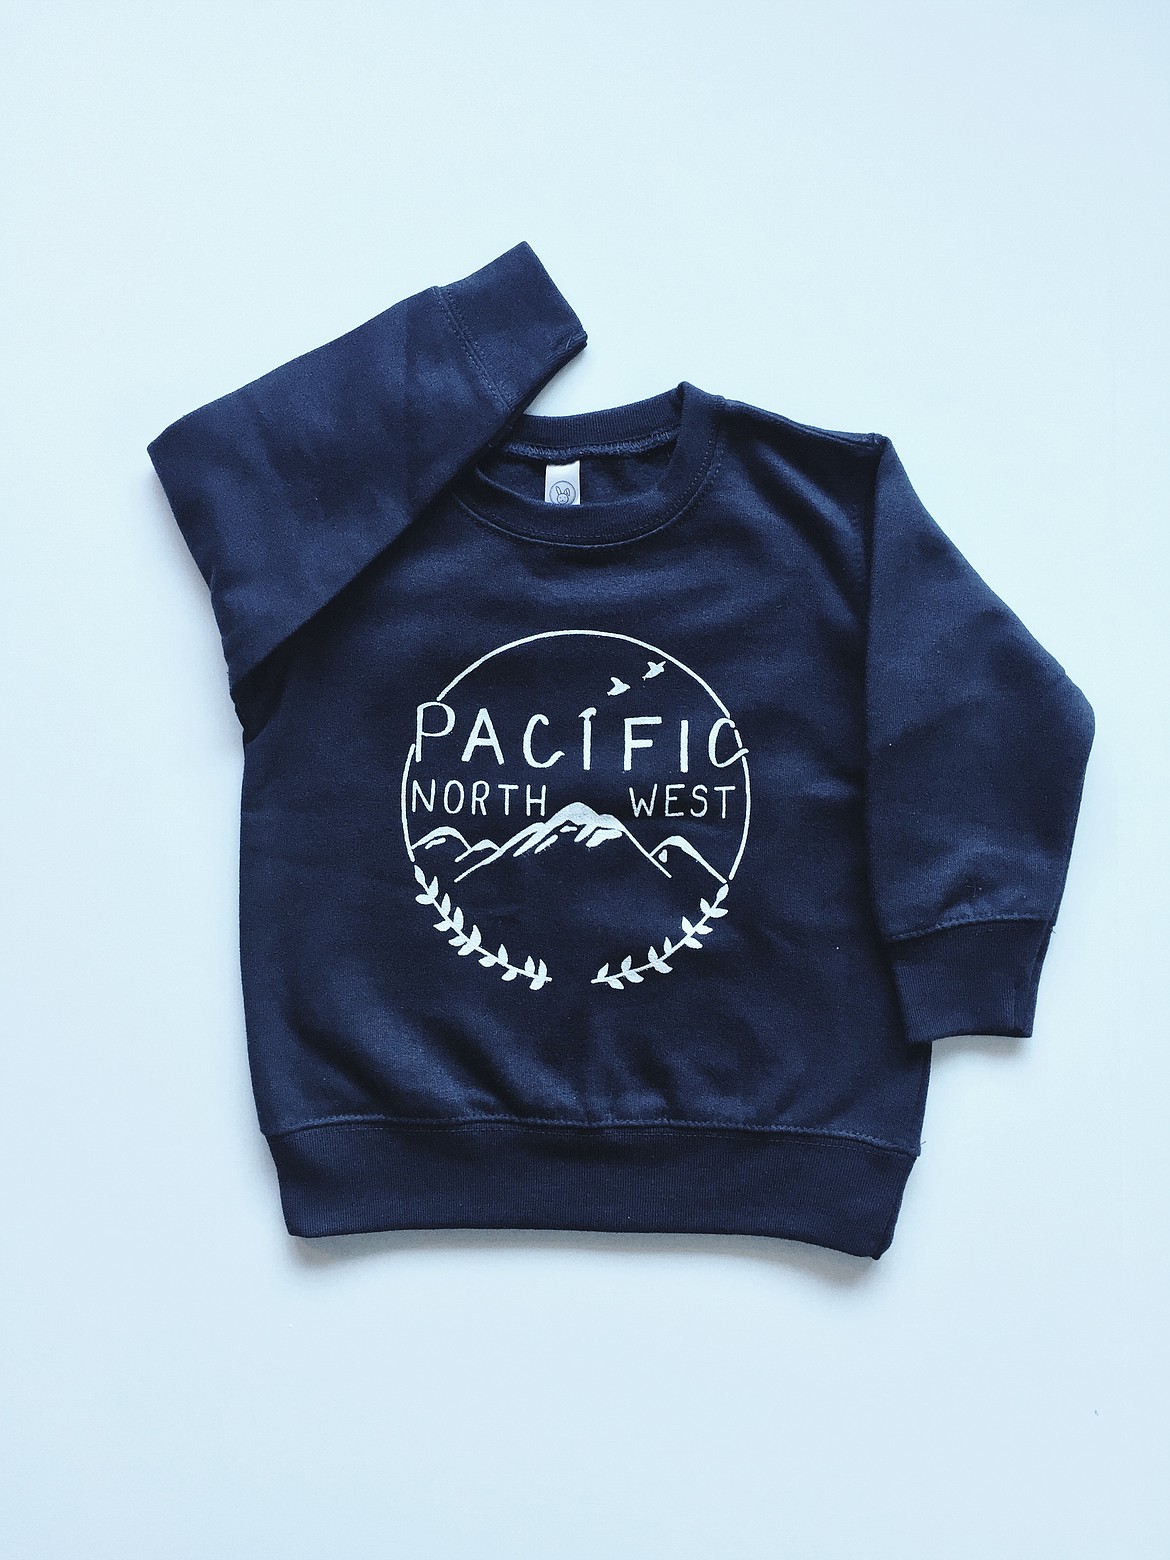 &#145;Pacific Northwest&#146; shirt designed by Kevin John of Simple Elms.